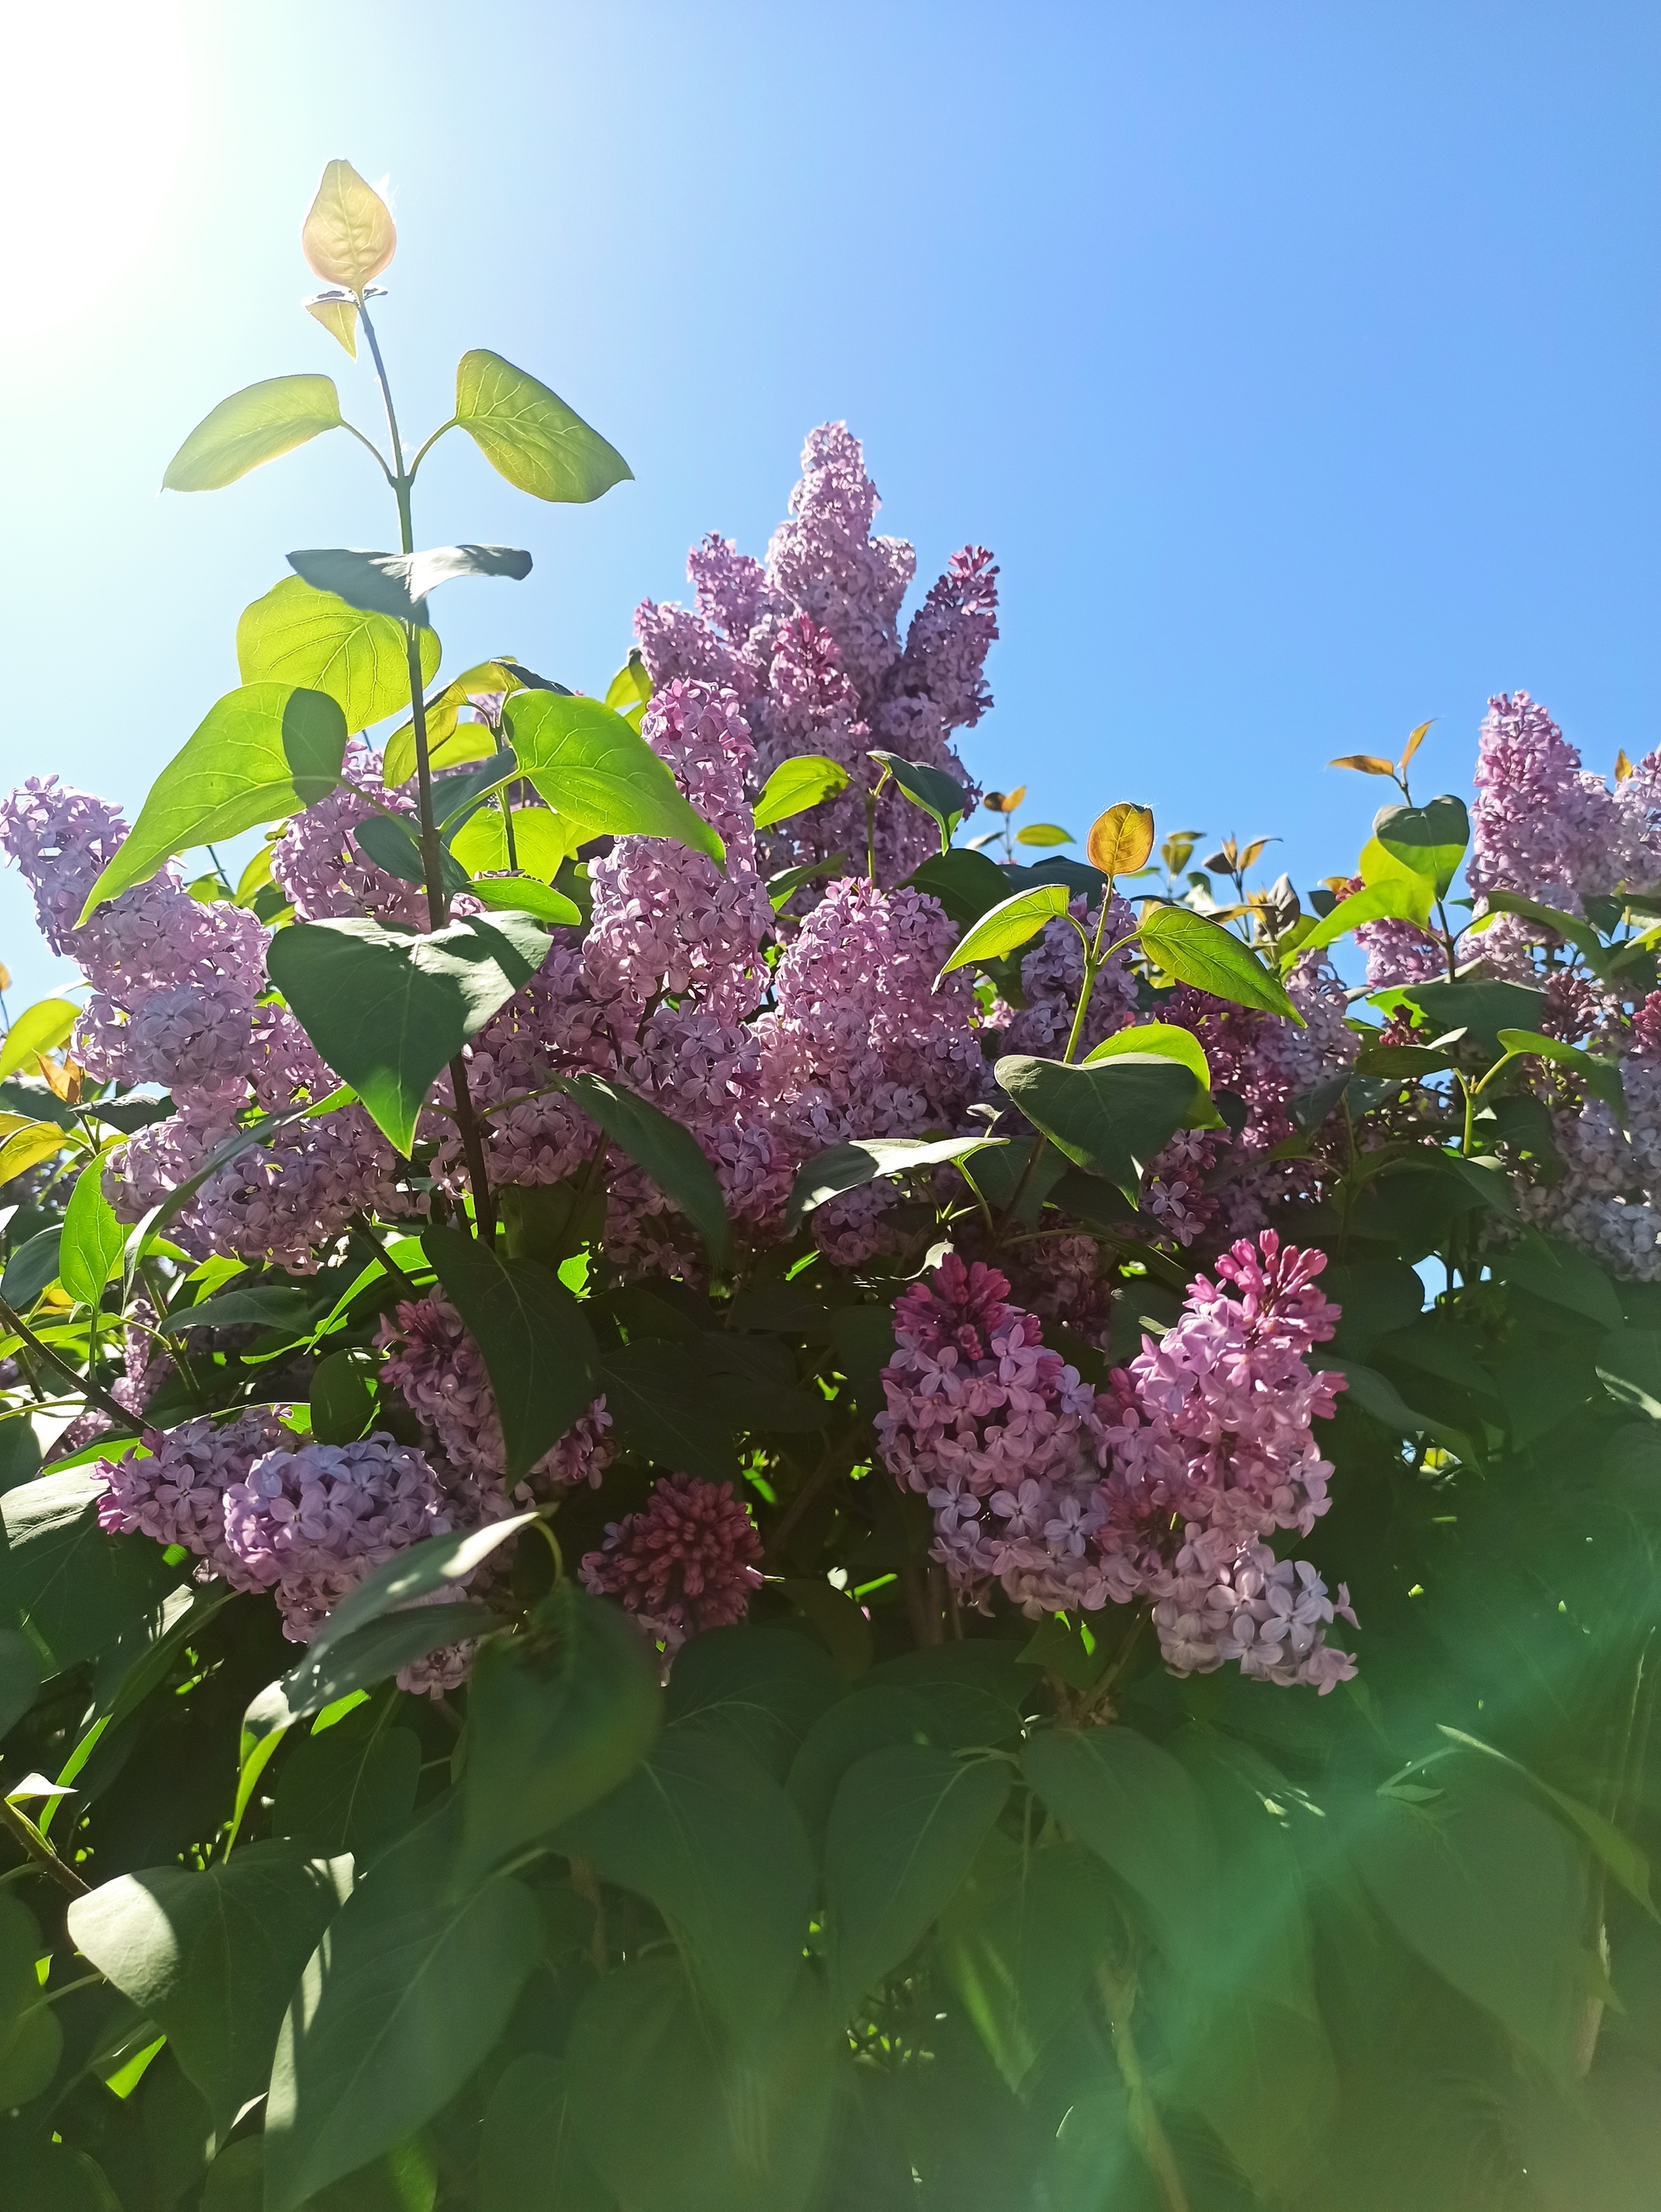 Lilac - The photo, Plants, beauty, Lilac, Morning, Good morning, Flowers, Images, Mobile photography, My